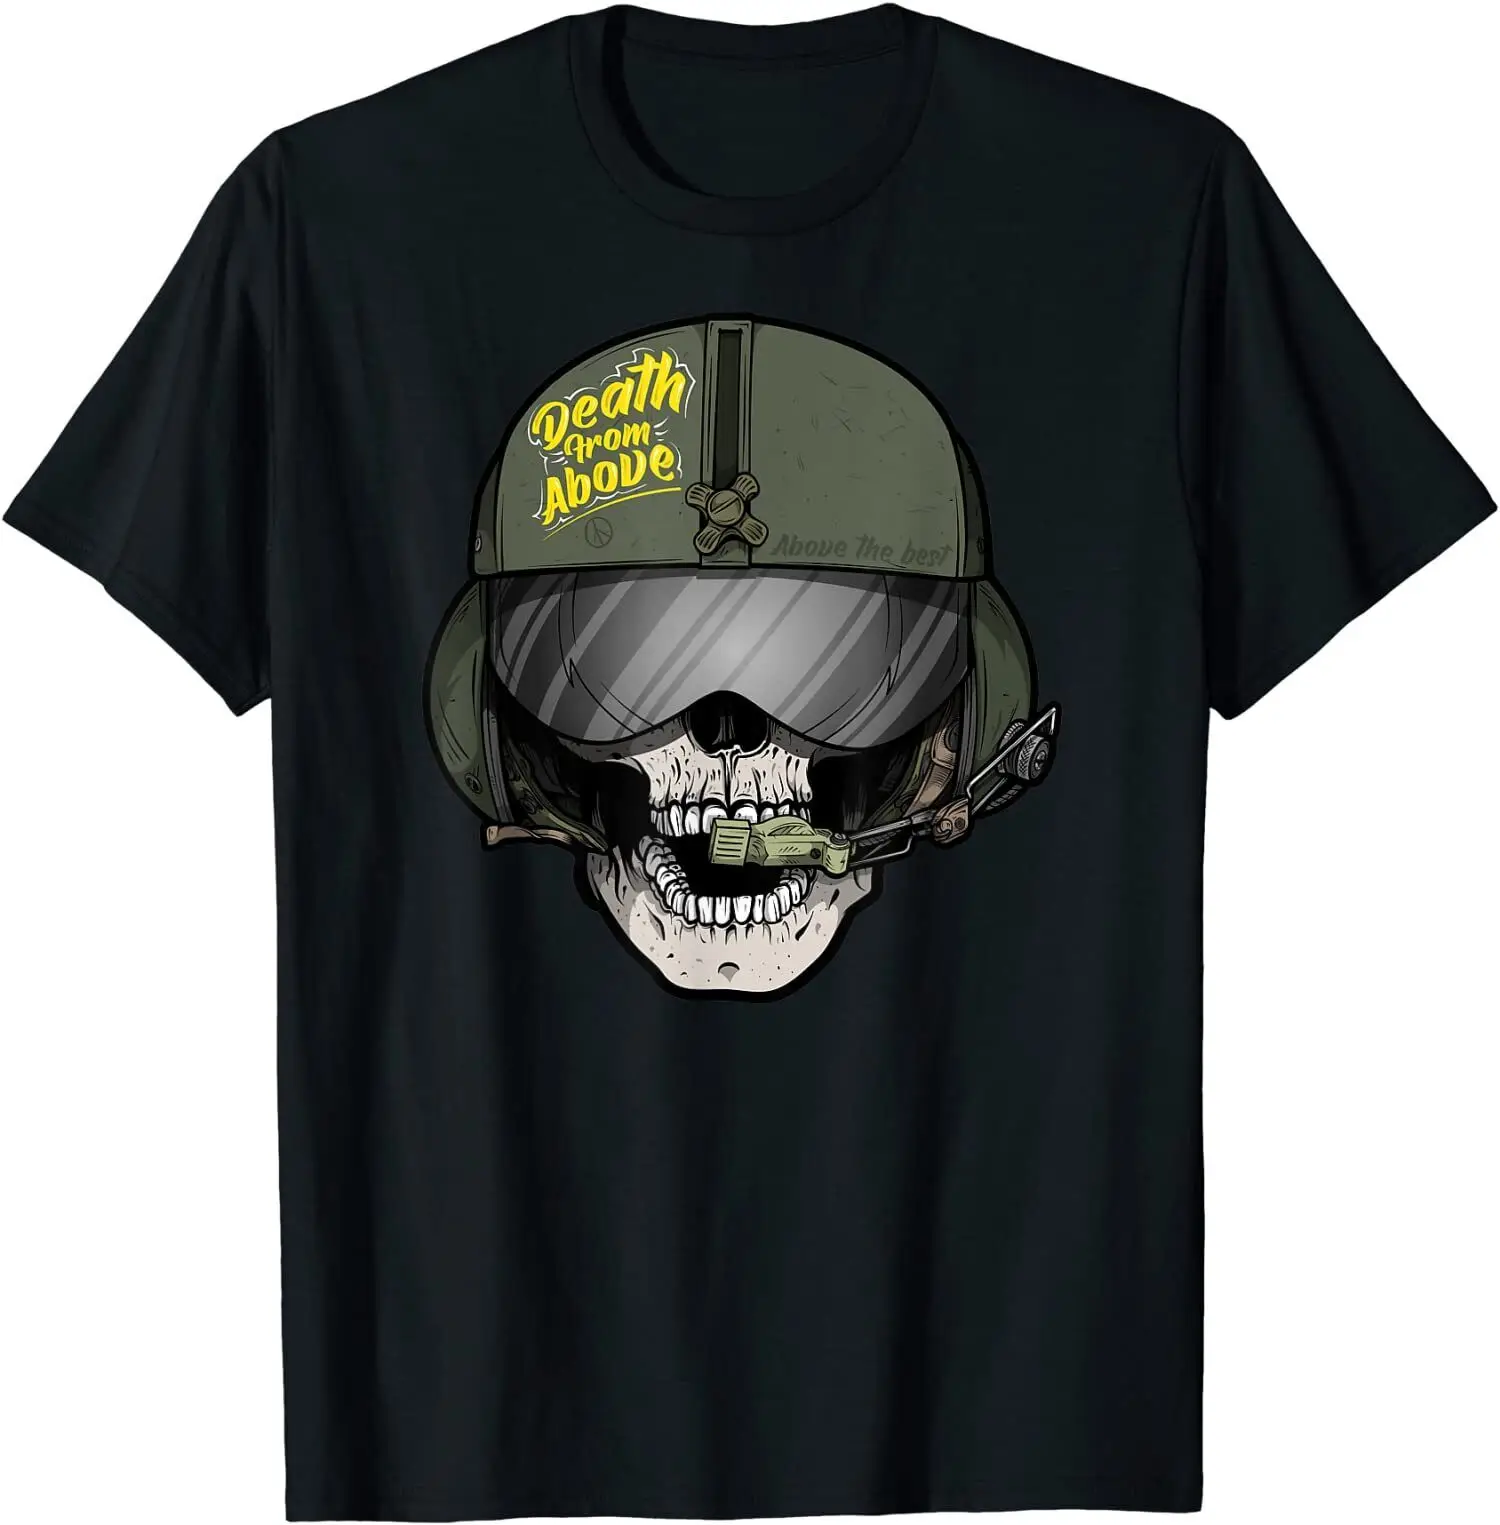 

Helicopter Pilot US Aviation Skull Great Gift Idea Tee T-Shirt Men's 100% Cotton Casual T-shirts Loose Top S-3XL